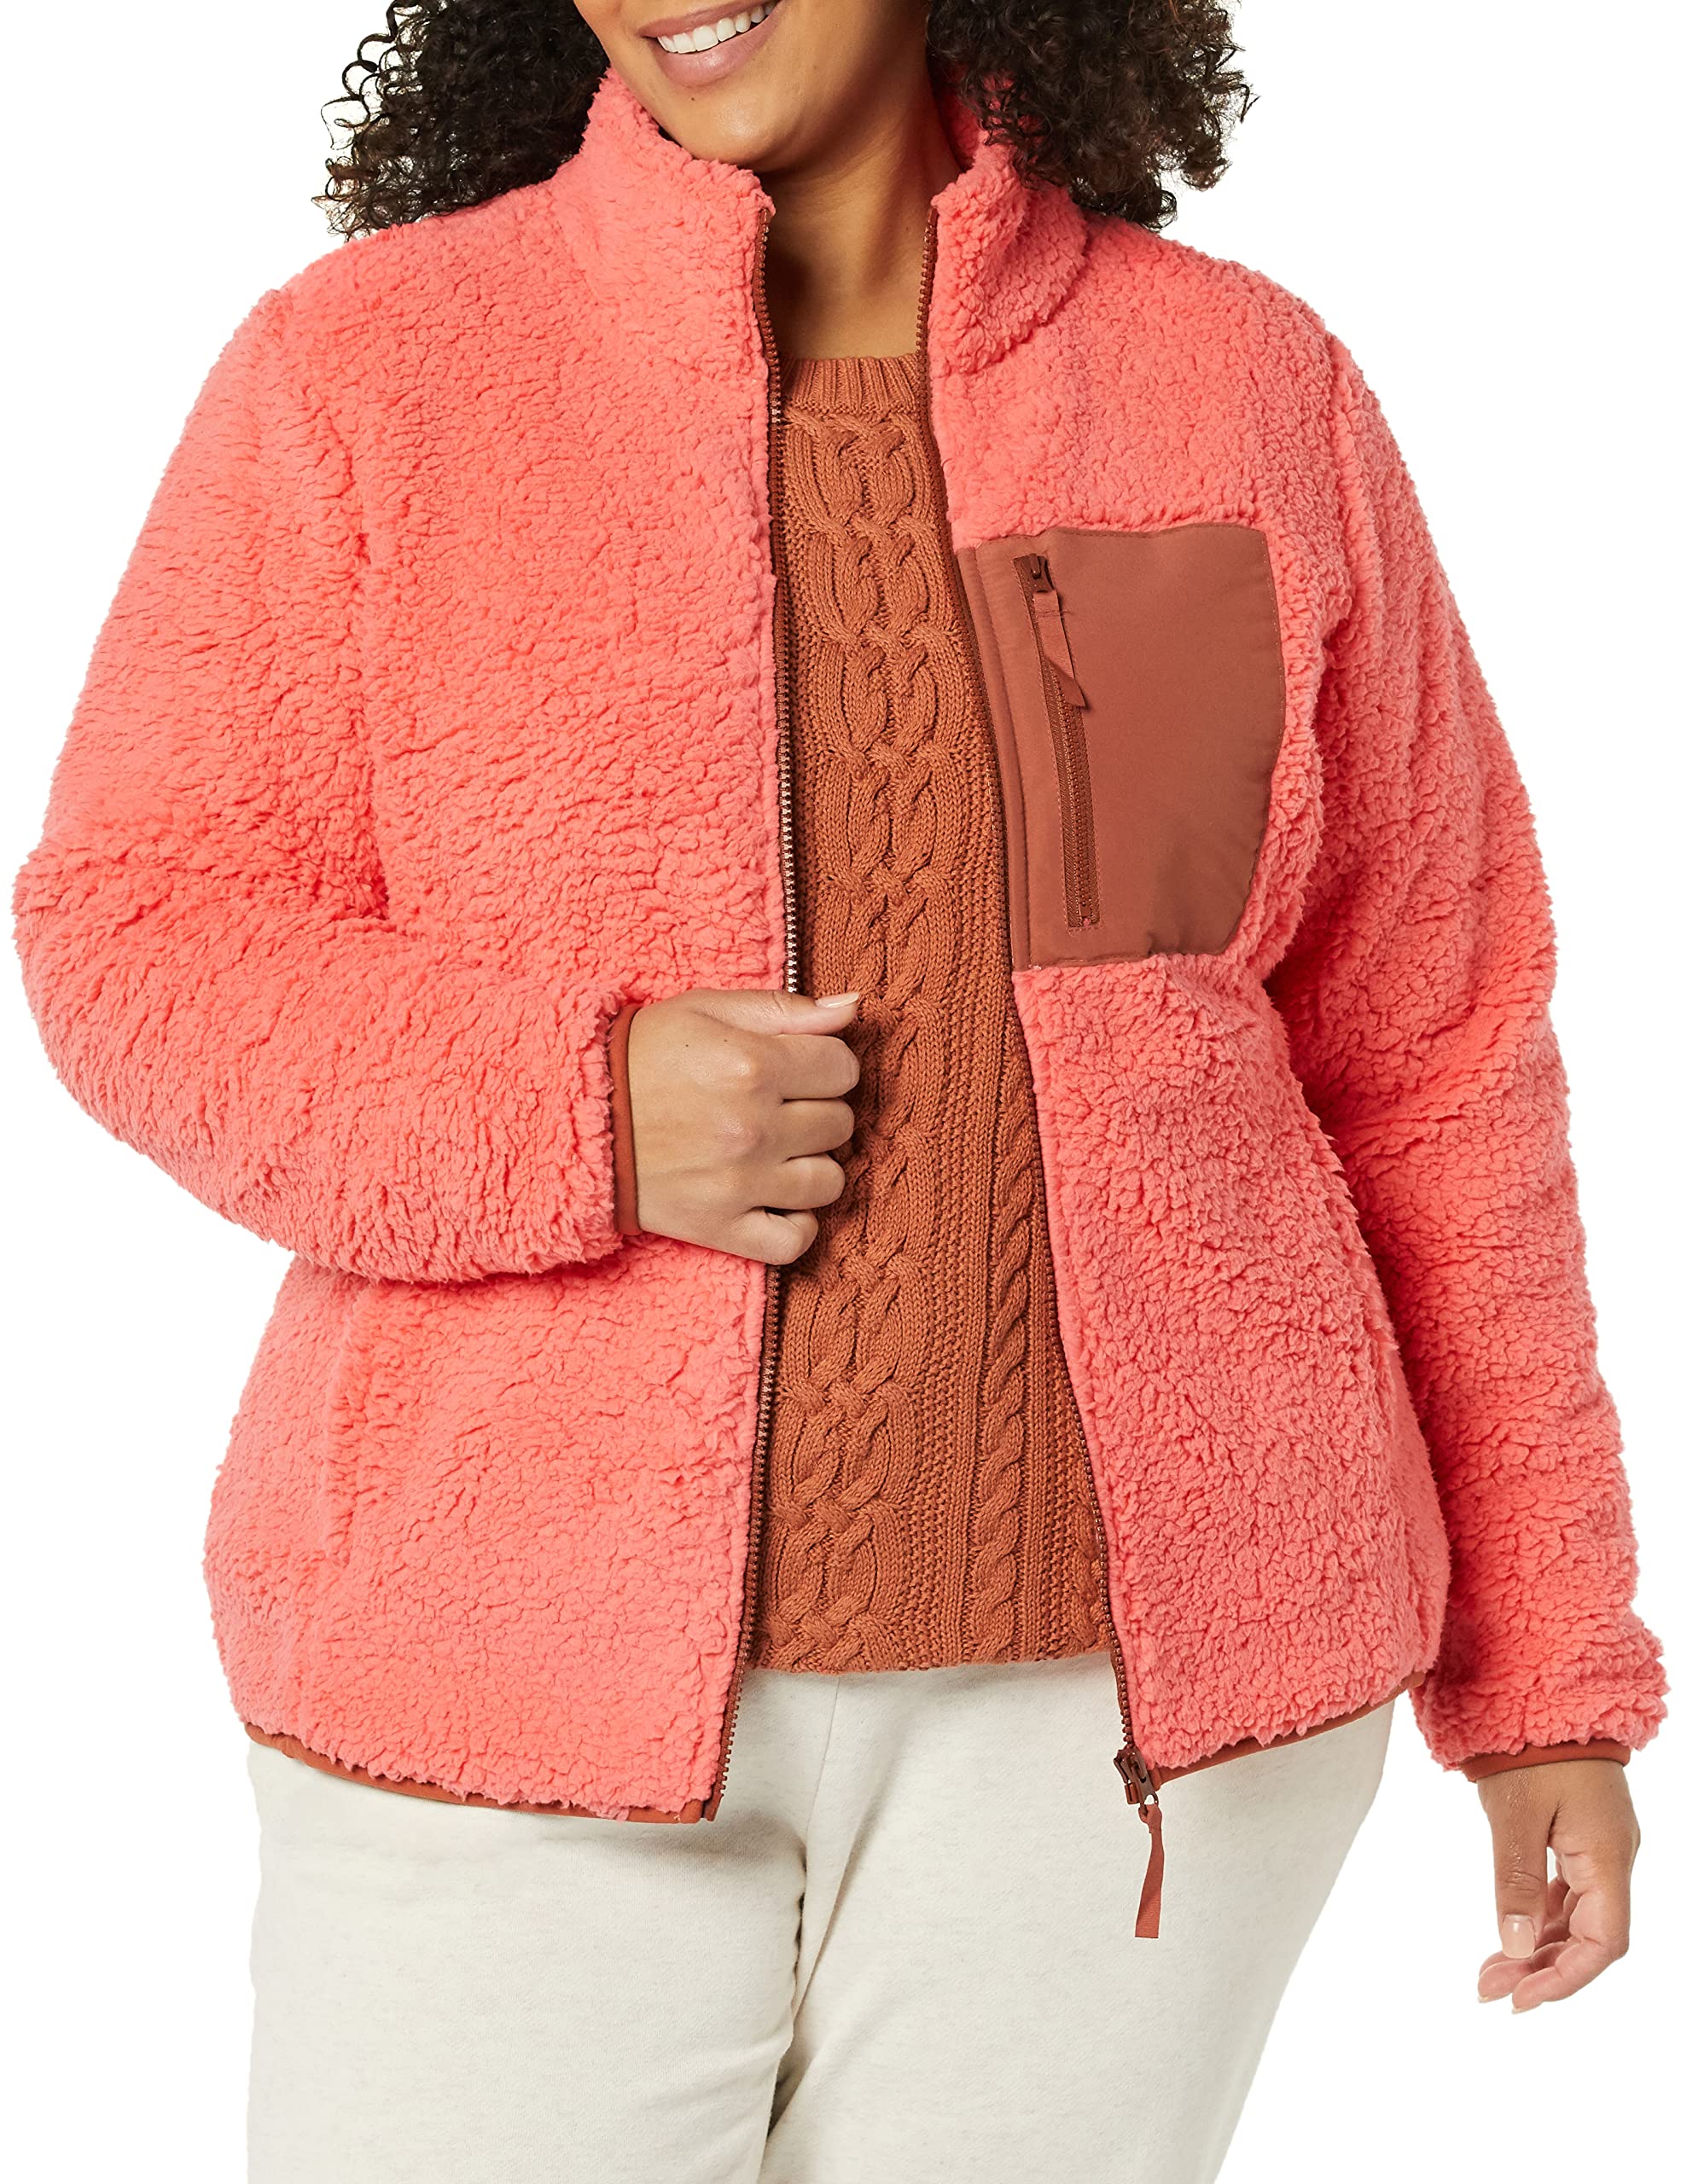 Amazon Essentials Women's Sherpa Long-Sleeve Mock Neck Full-Zip Jacket with Woven Trim (Available in Plus Size)